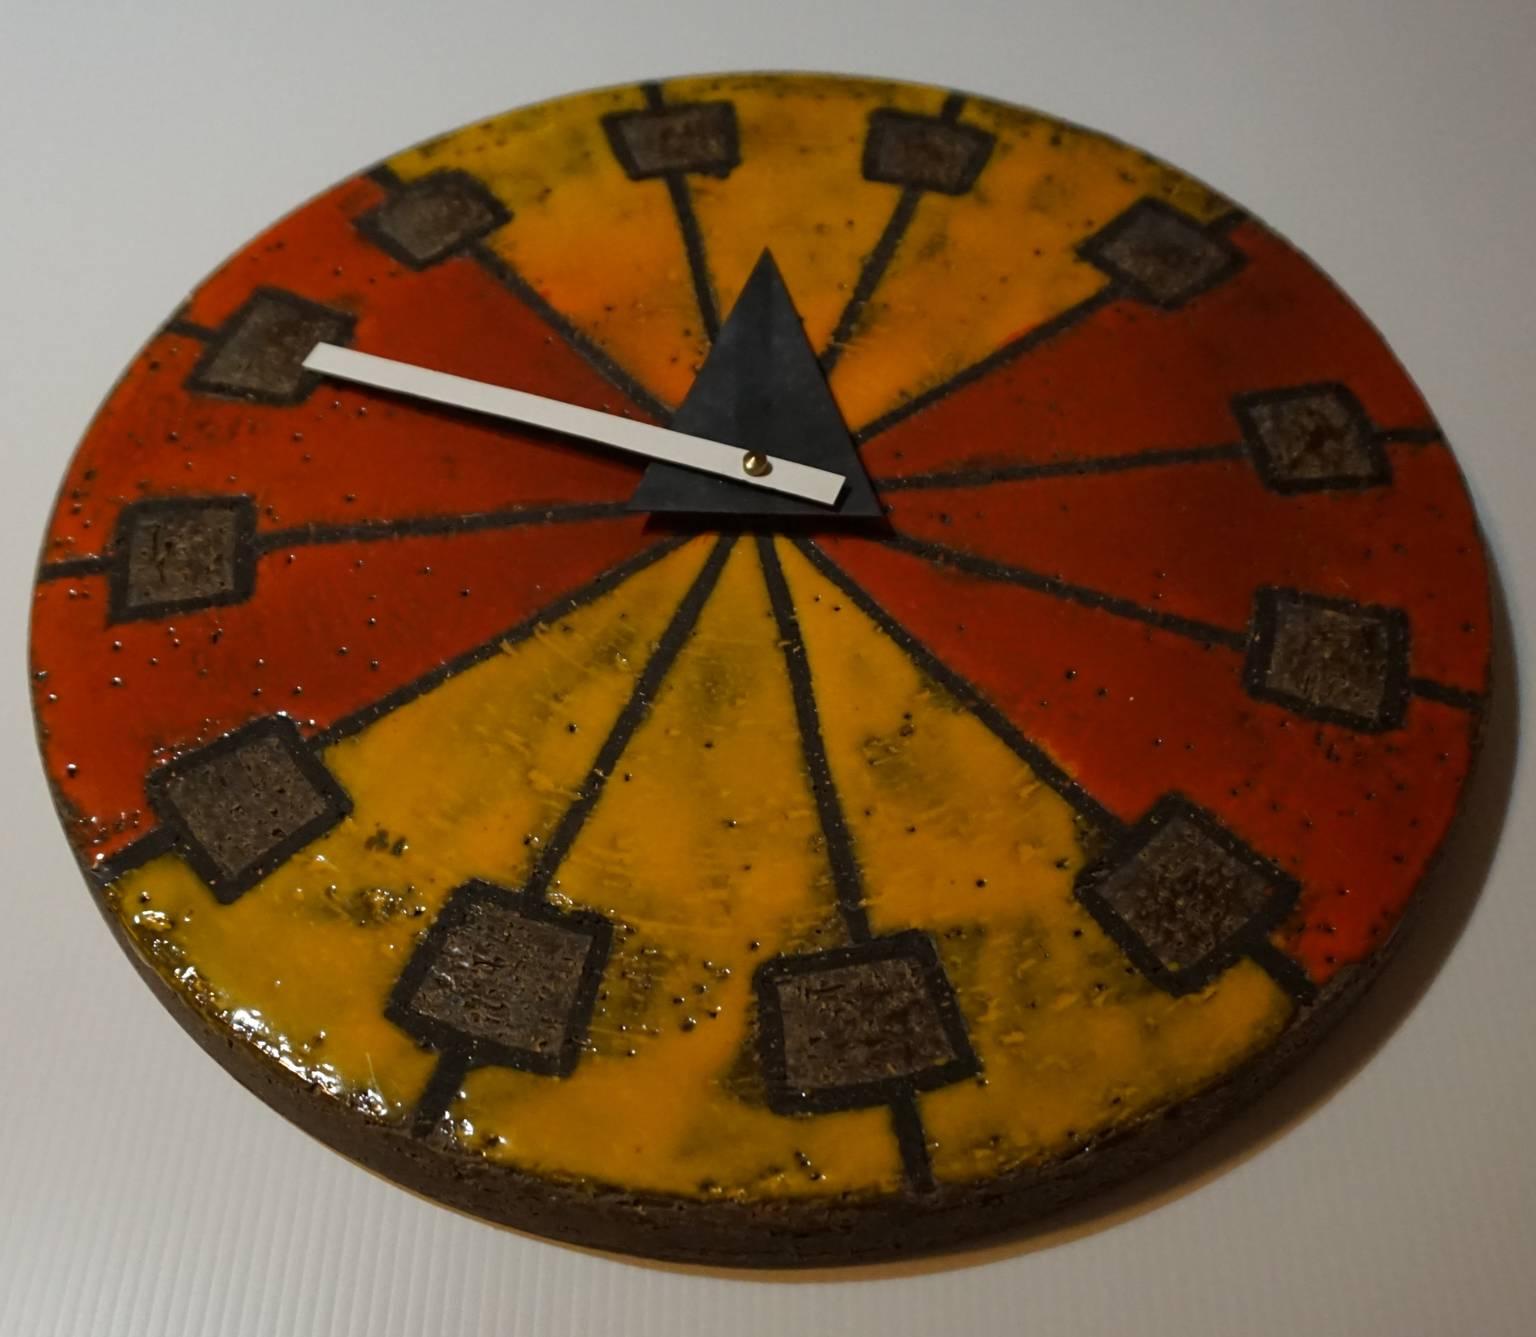 Ceramic wall clock from Howard Miller's Merdian line, from 1964. As stated in the Howard Miller catalog, the handcrafted clock was a collaboration between artists and the clock company.

Original hands, with a new and quiet USA made battery